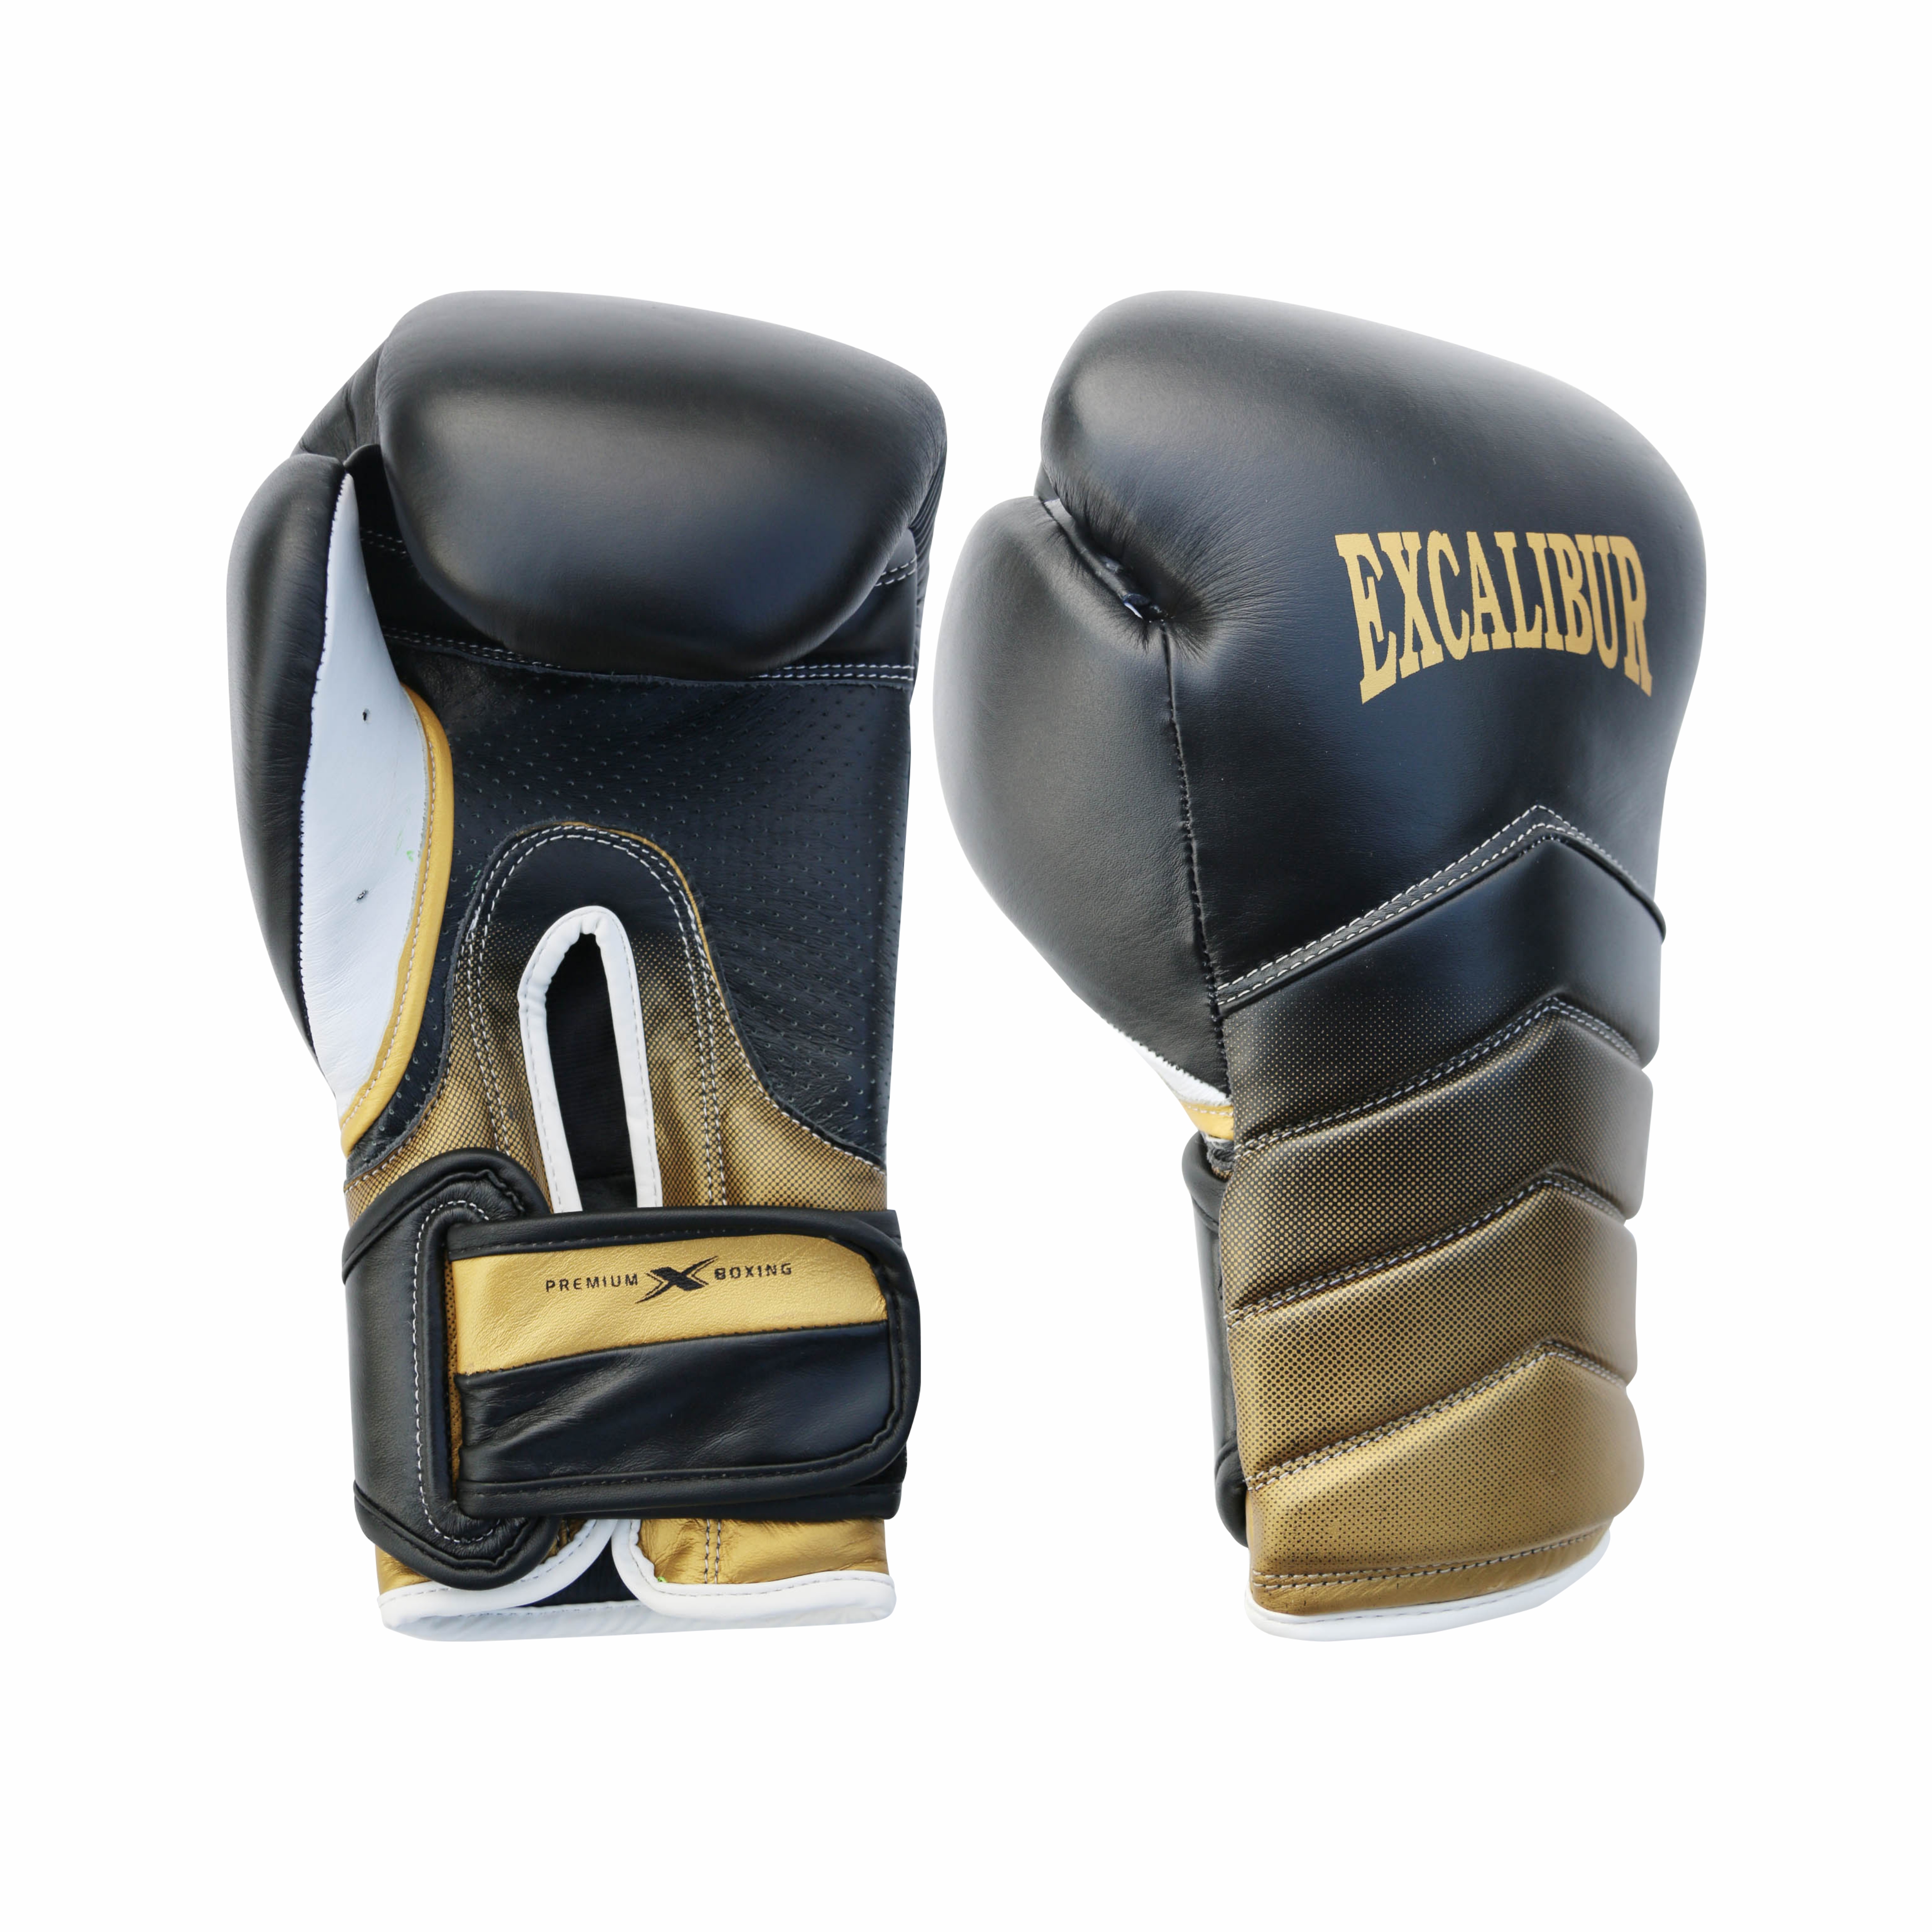 Clinch Boxing Gloves